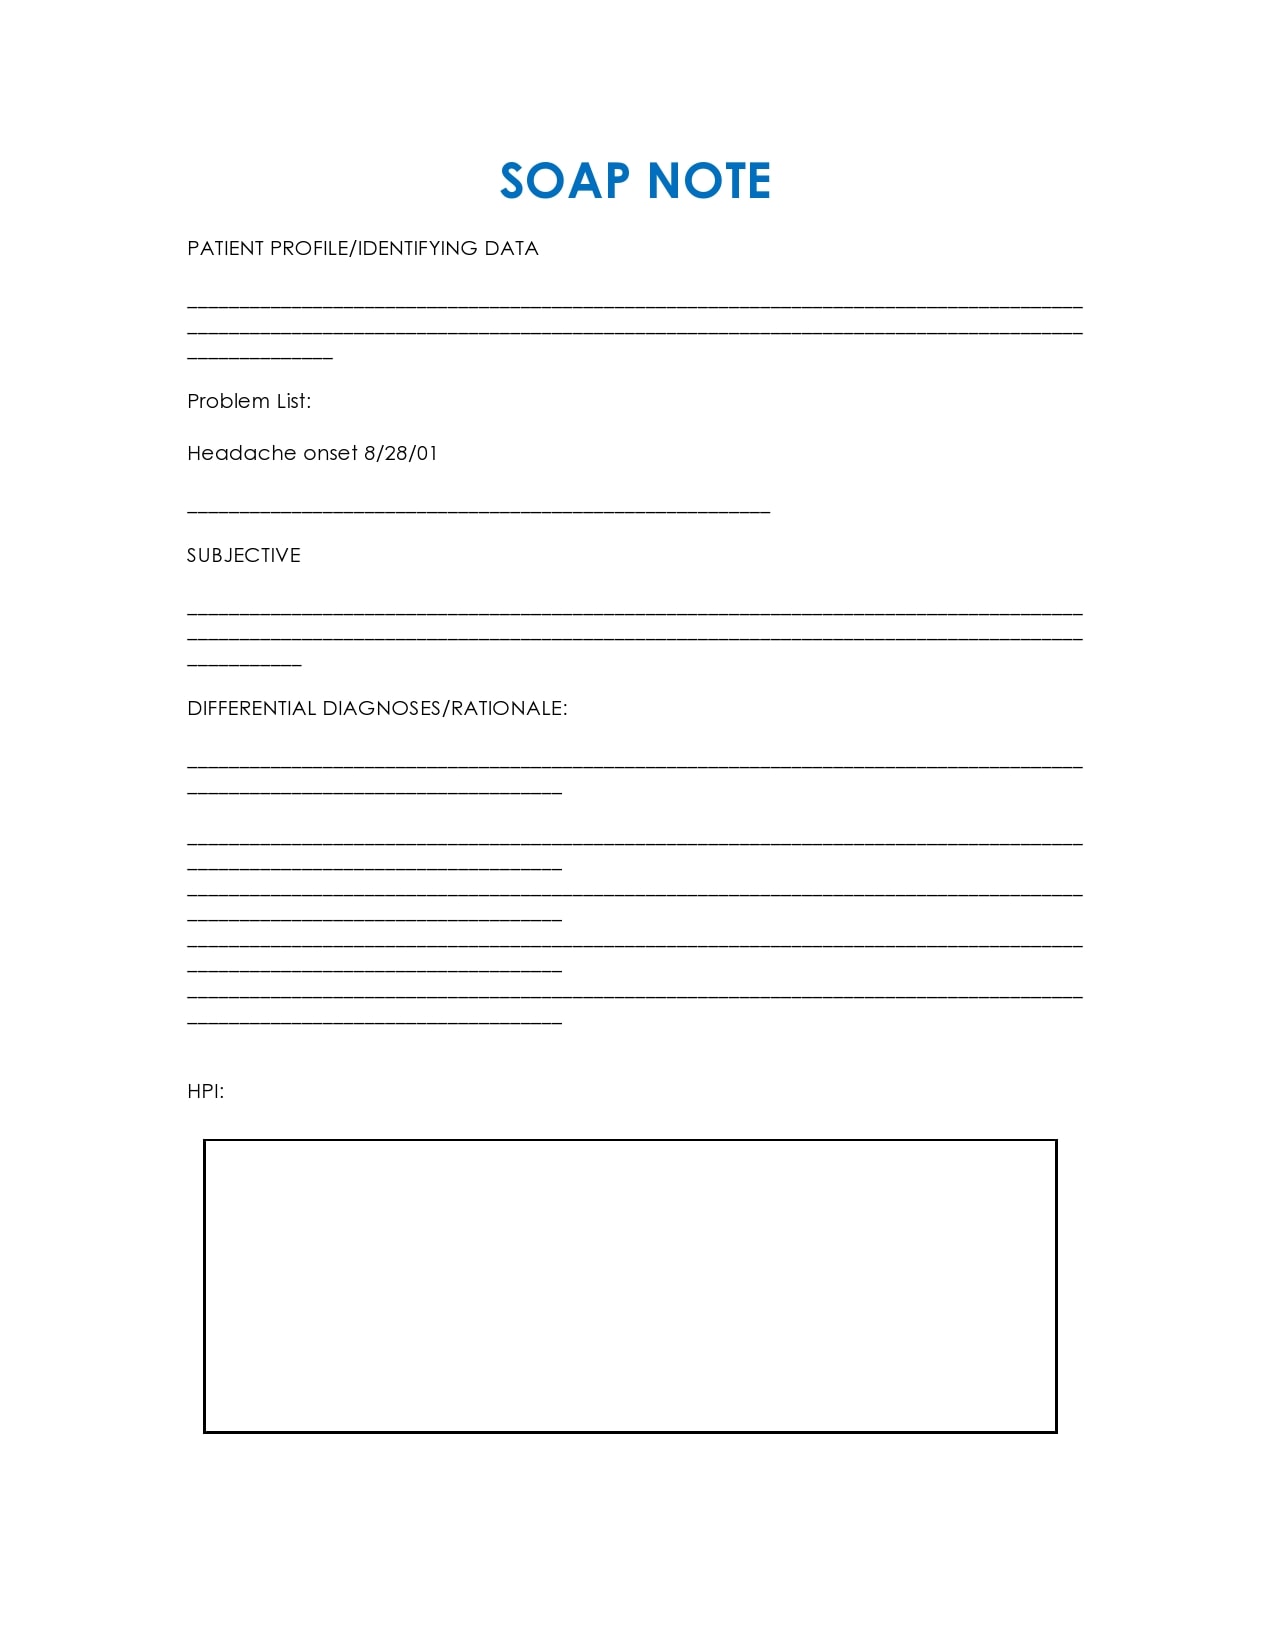 22 Blank SOAP Note Templates (+Examples) - TemplateArchive For Blank Soap Note Template